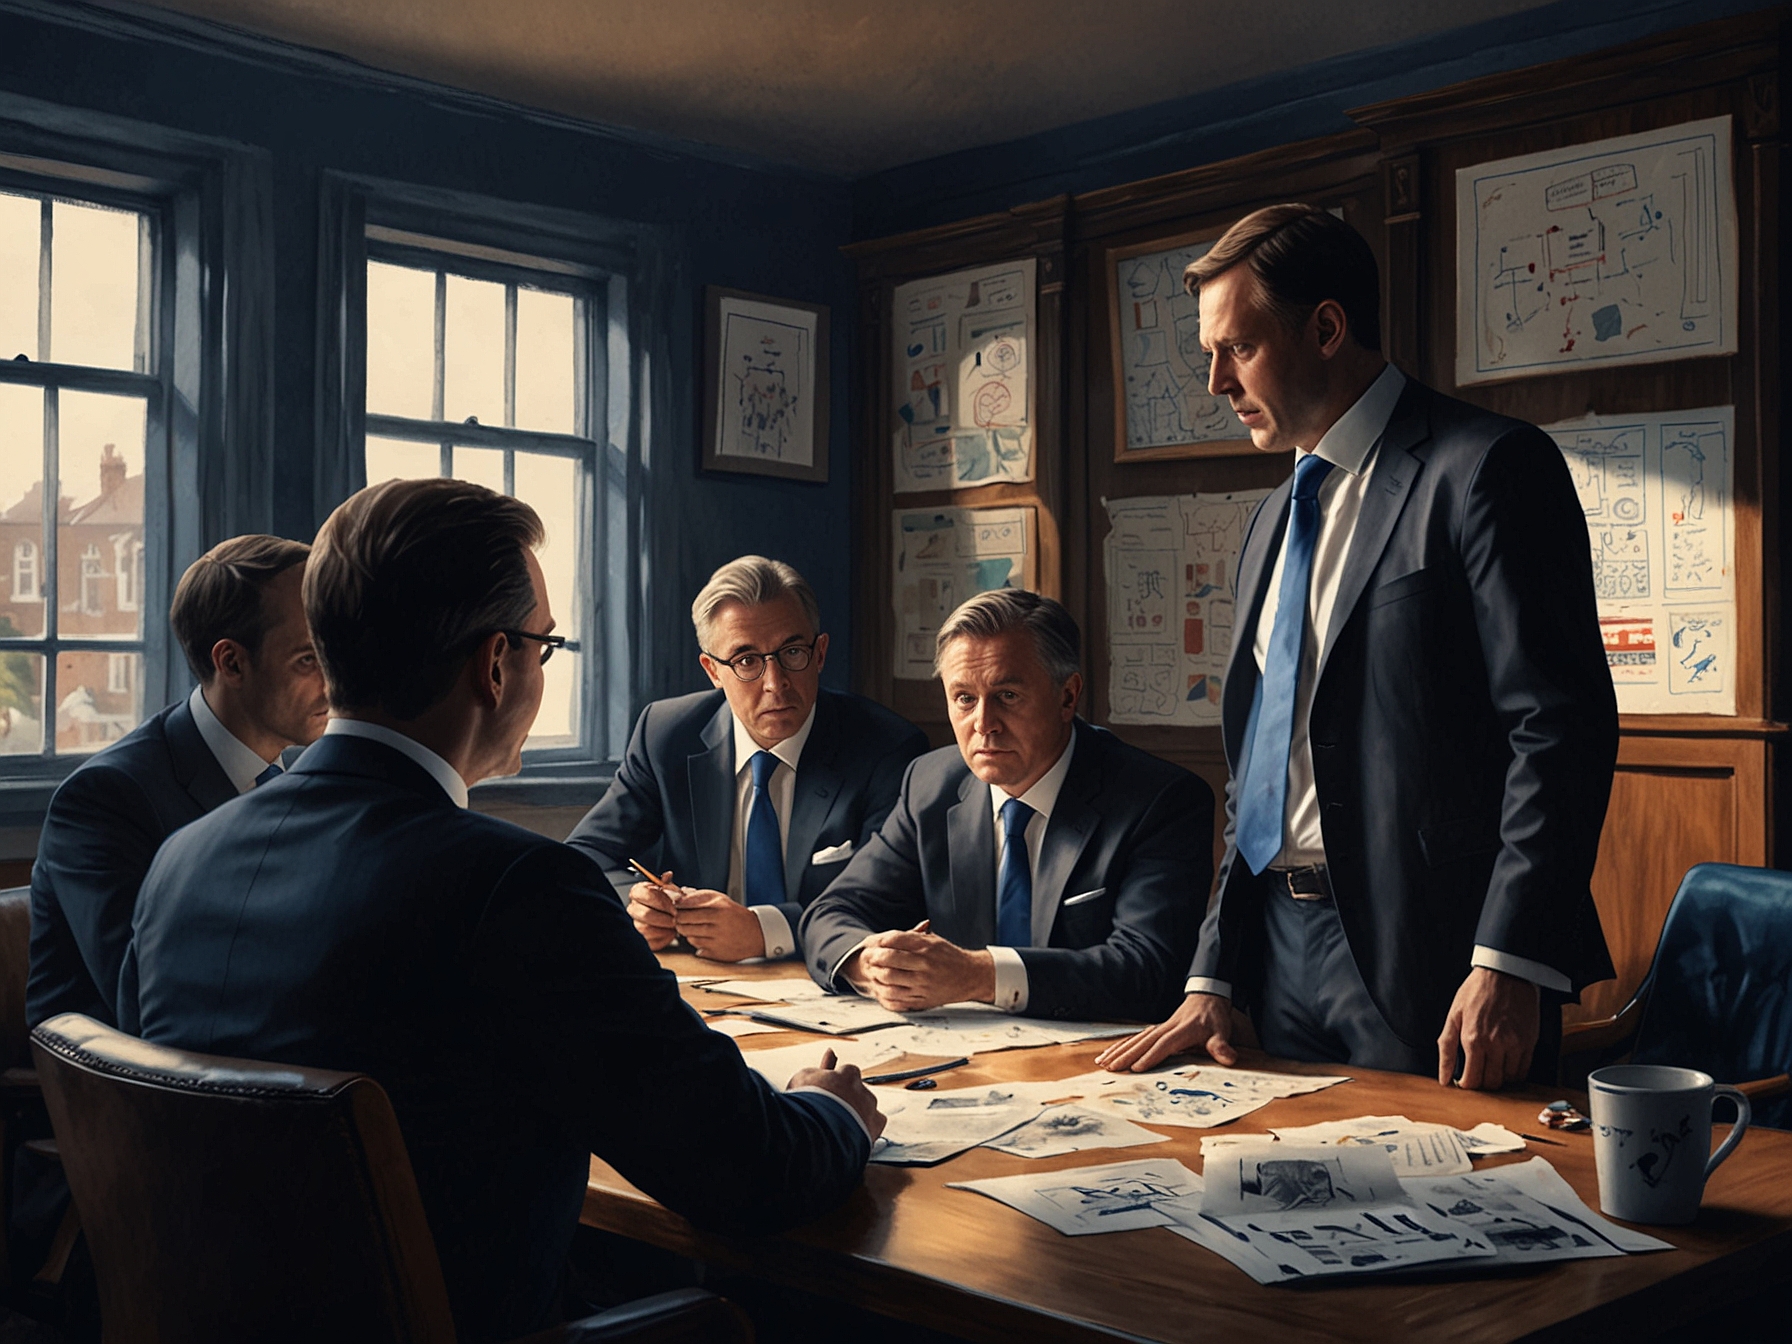 An illustration showing Everton's management team deliberating on financial strategies, including player sales and salary adjustments, to navigate through this pivotal summer period.